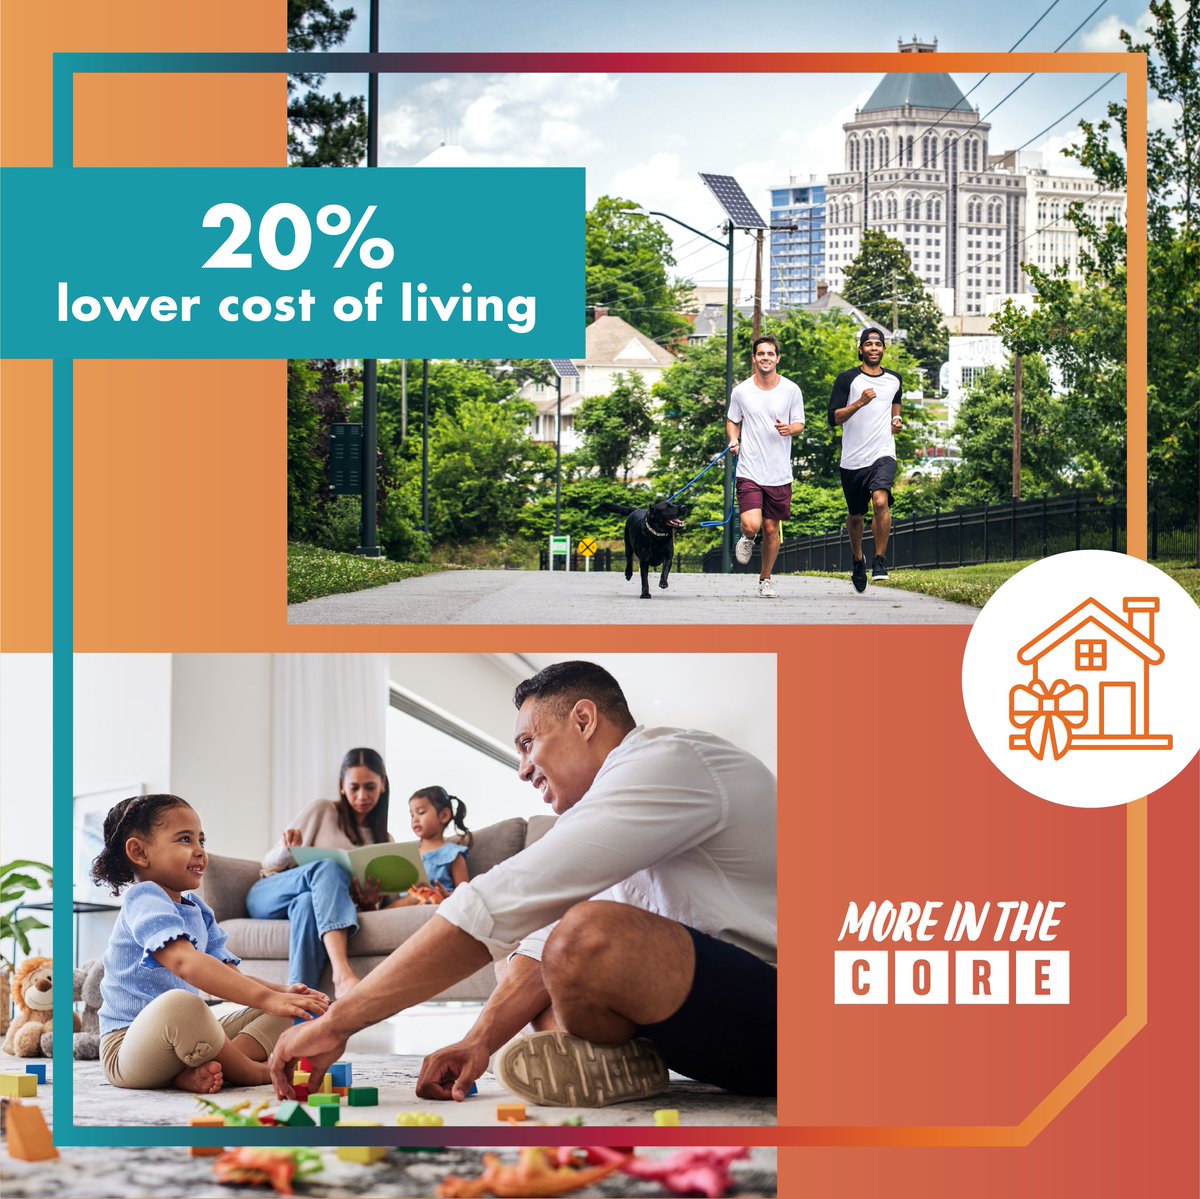 Spend less time house hunting & more time housewarming with a region that’s move-in ready. We offer a 20% lower avg. cost of living than major metros. Your next big move doesn’t have to put a dent in your budget. #CarolinaCore Cost of living calculator: bit.ly/3vKq76U